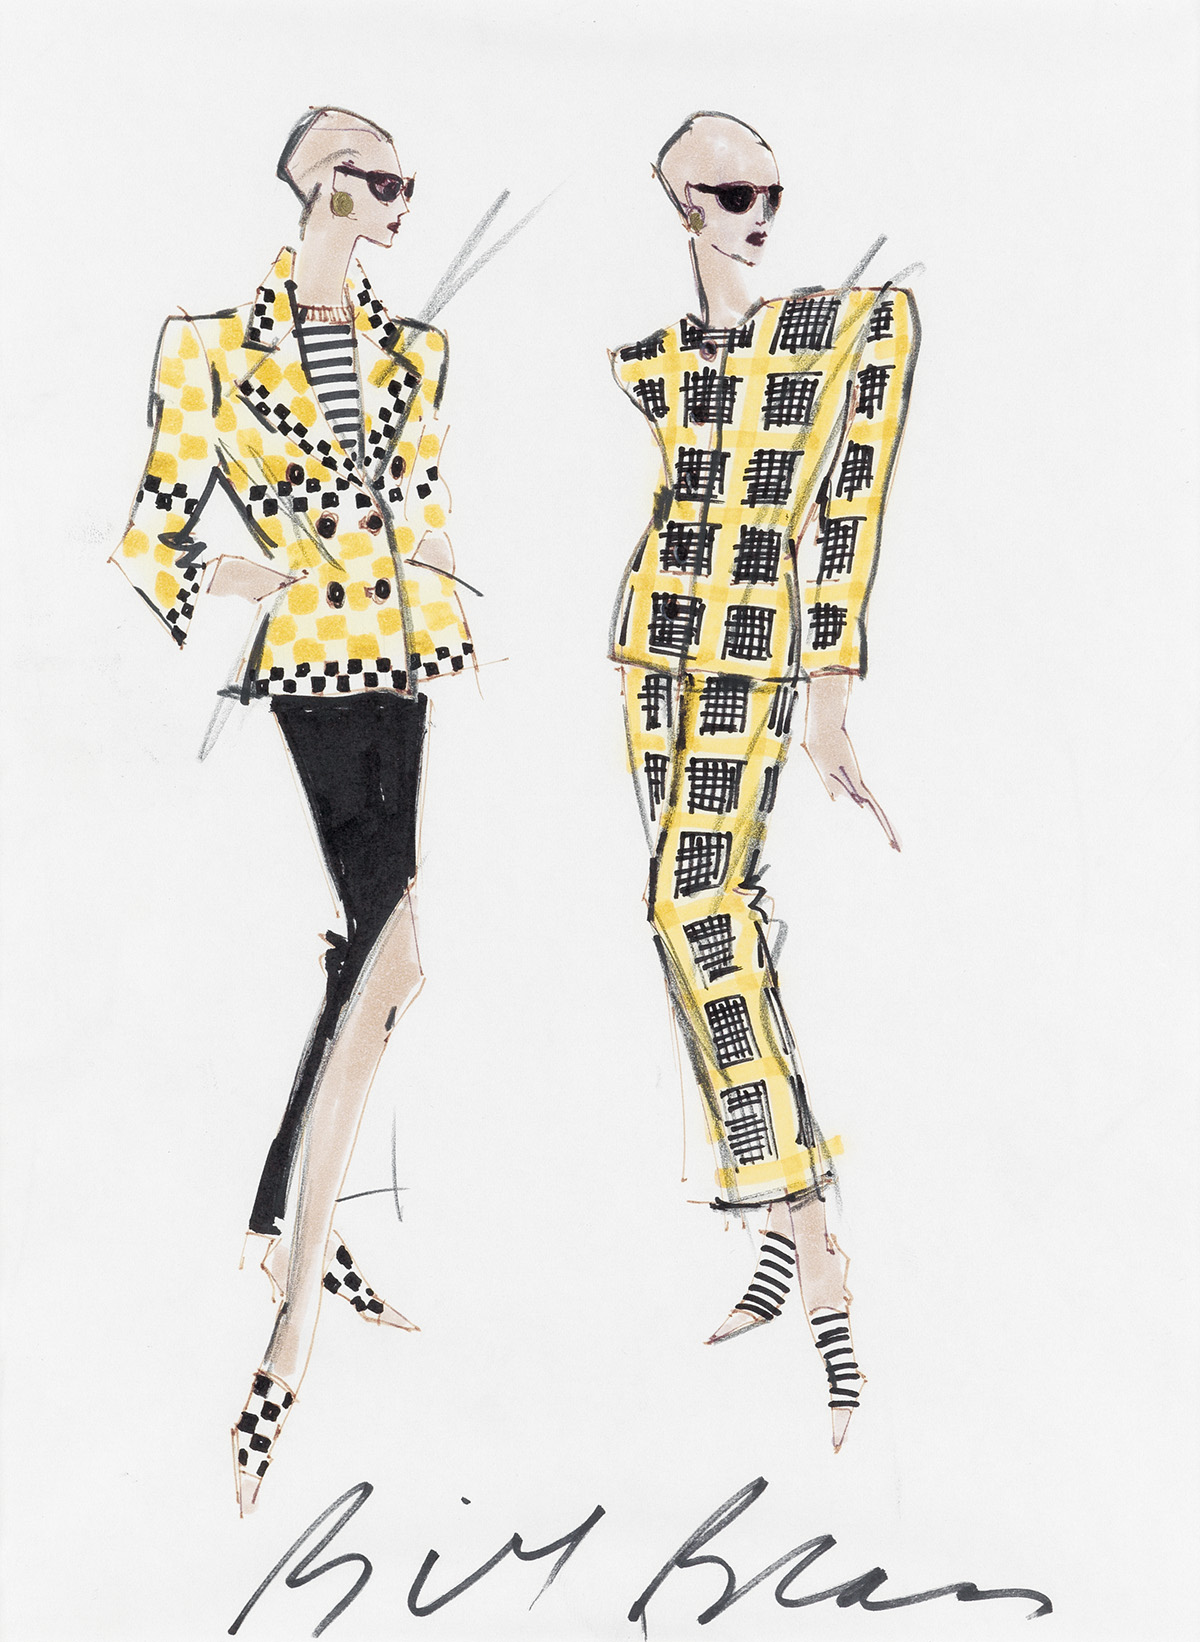 BILL BLASS. Power Suits and Shoulder Pads.